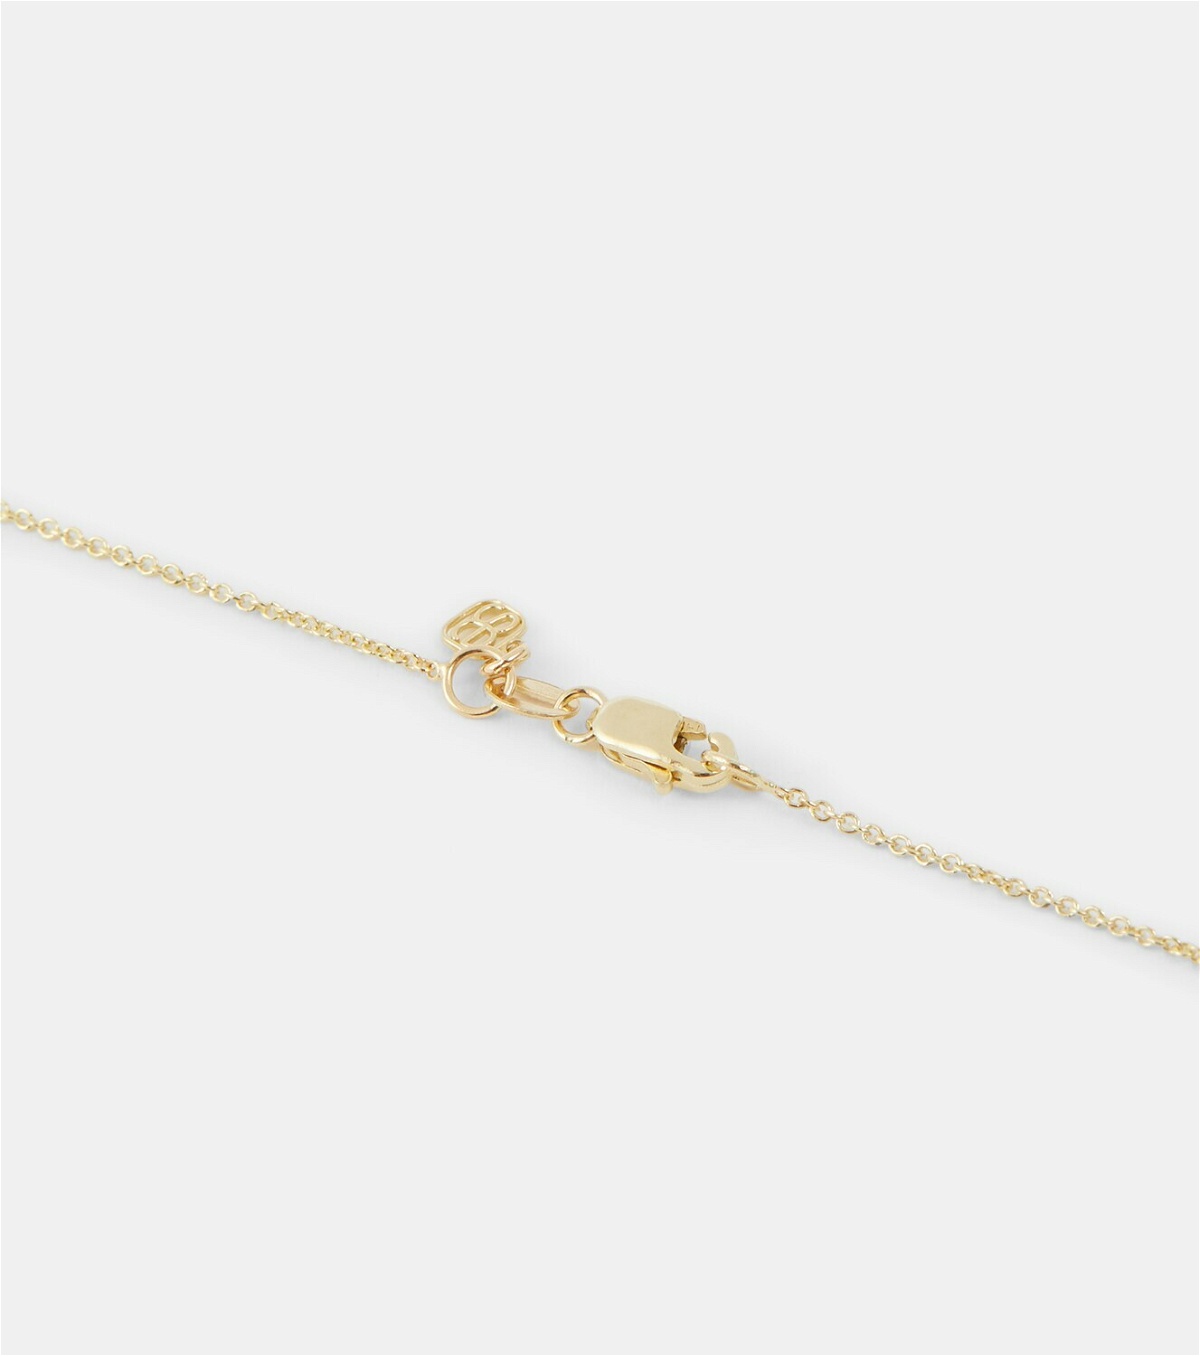 Sydney Evan Happy Face 14kt yellow gold charm necklace with diamonds